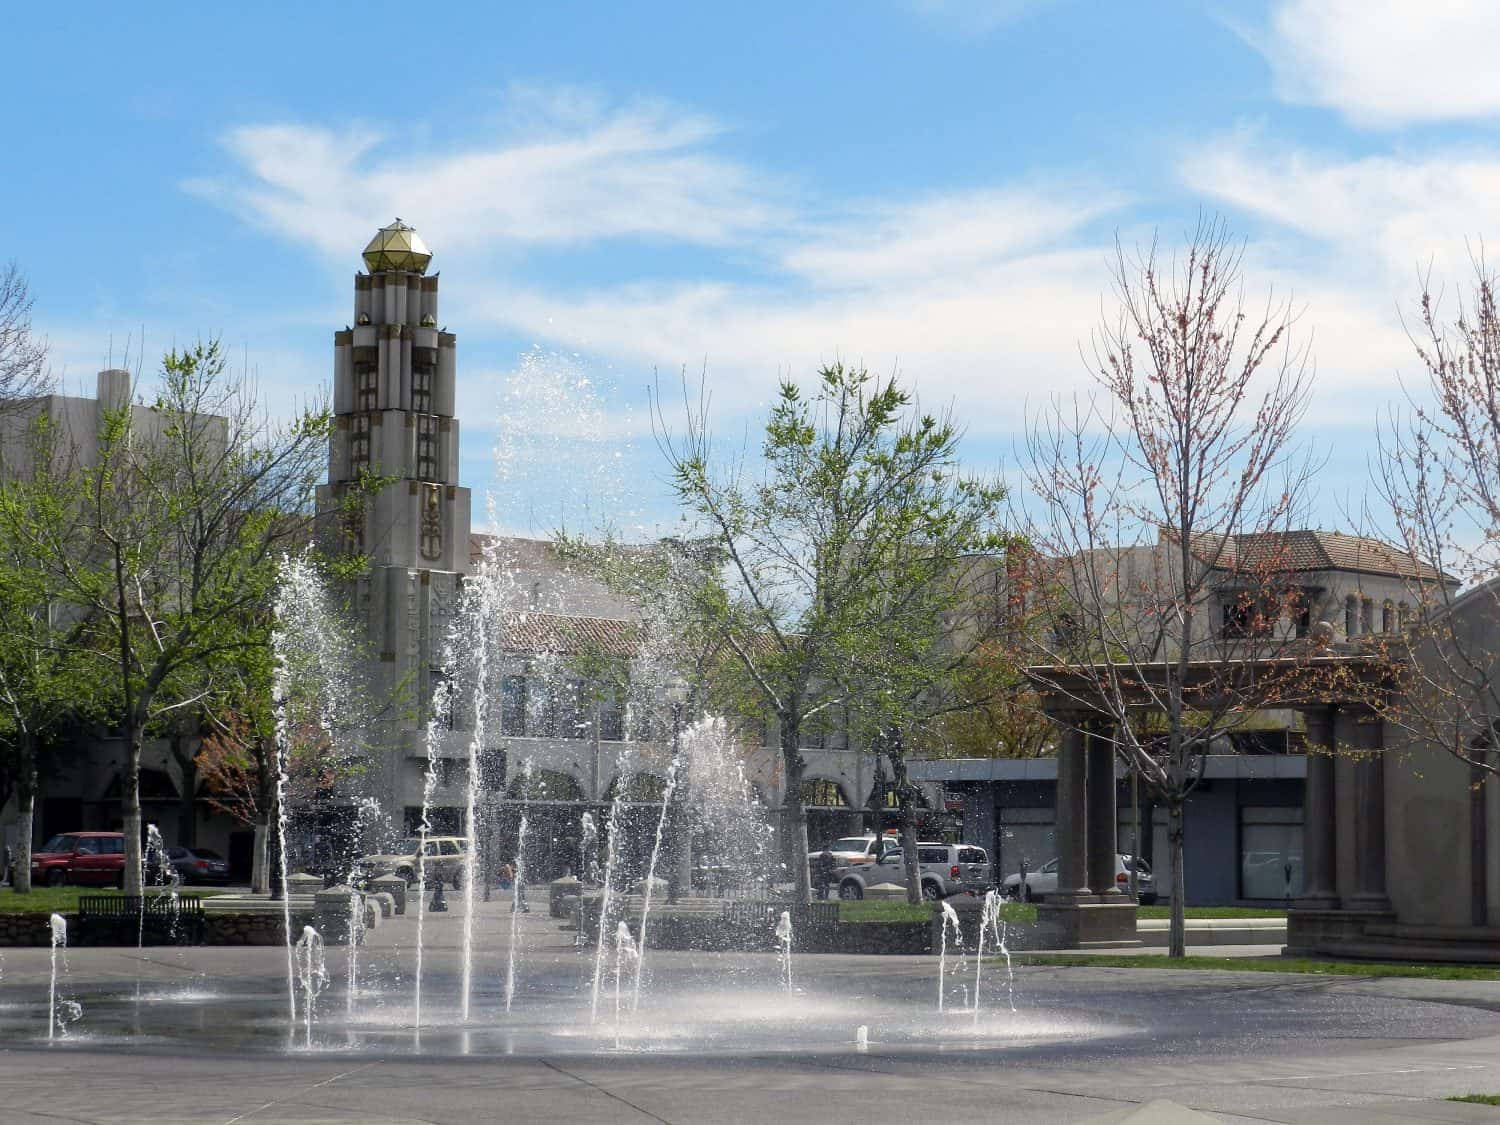 Closer up of fountain in downtown plaza. Chico, California